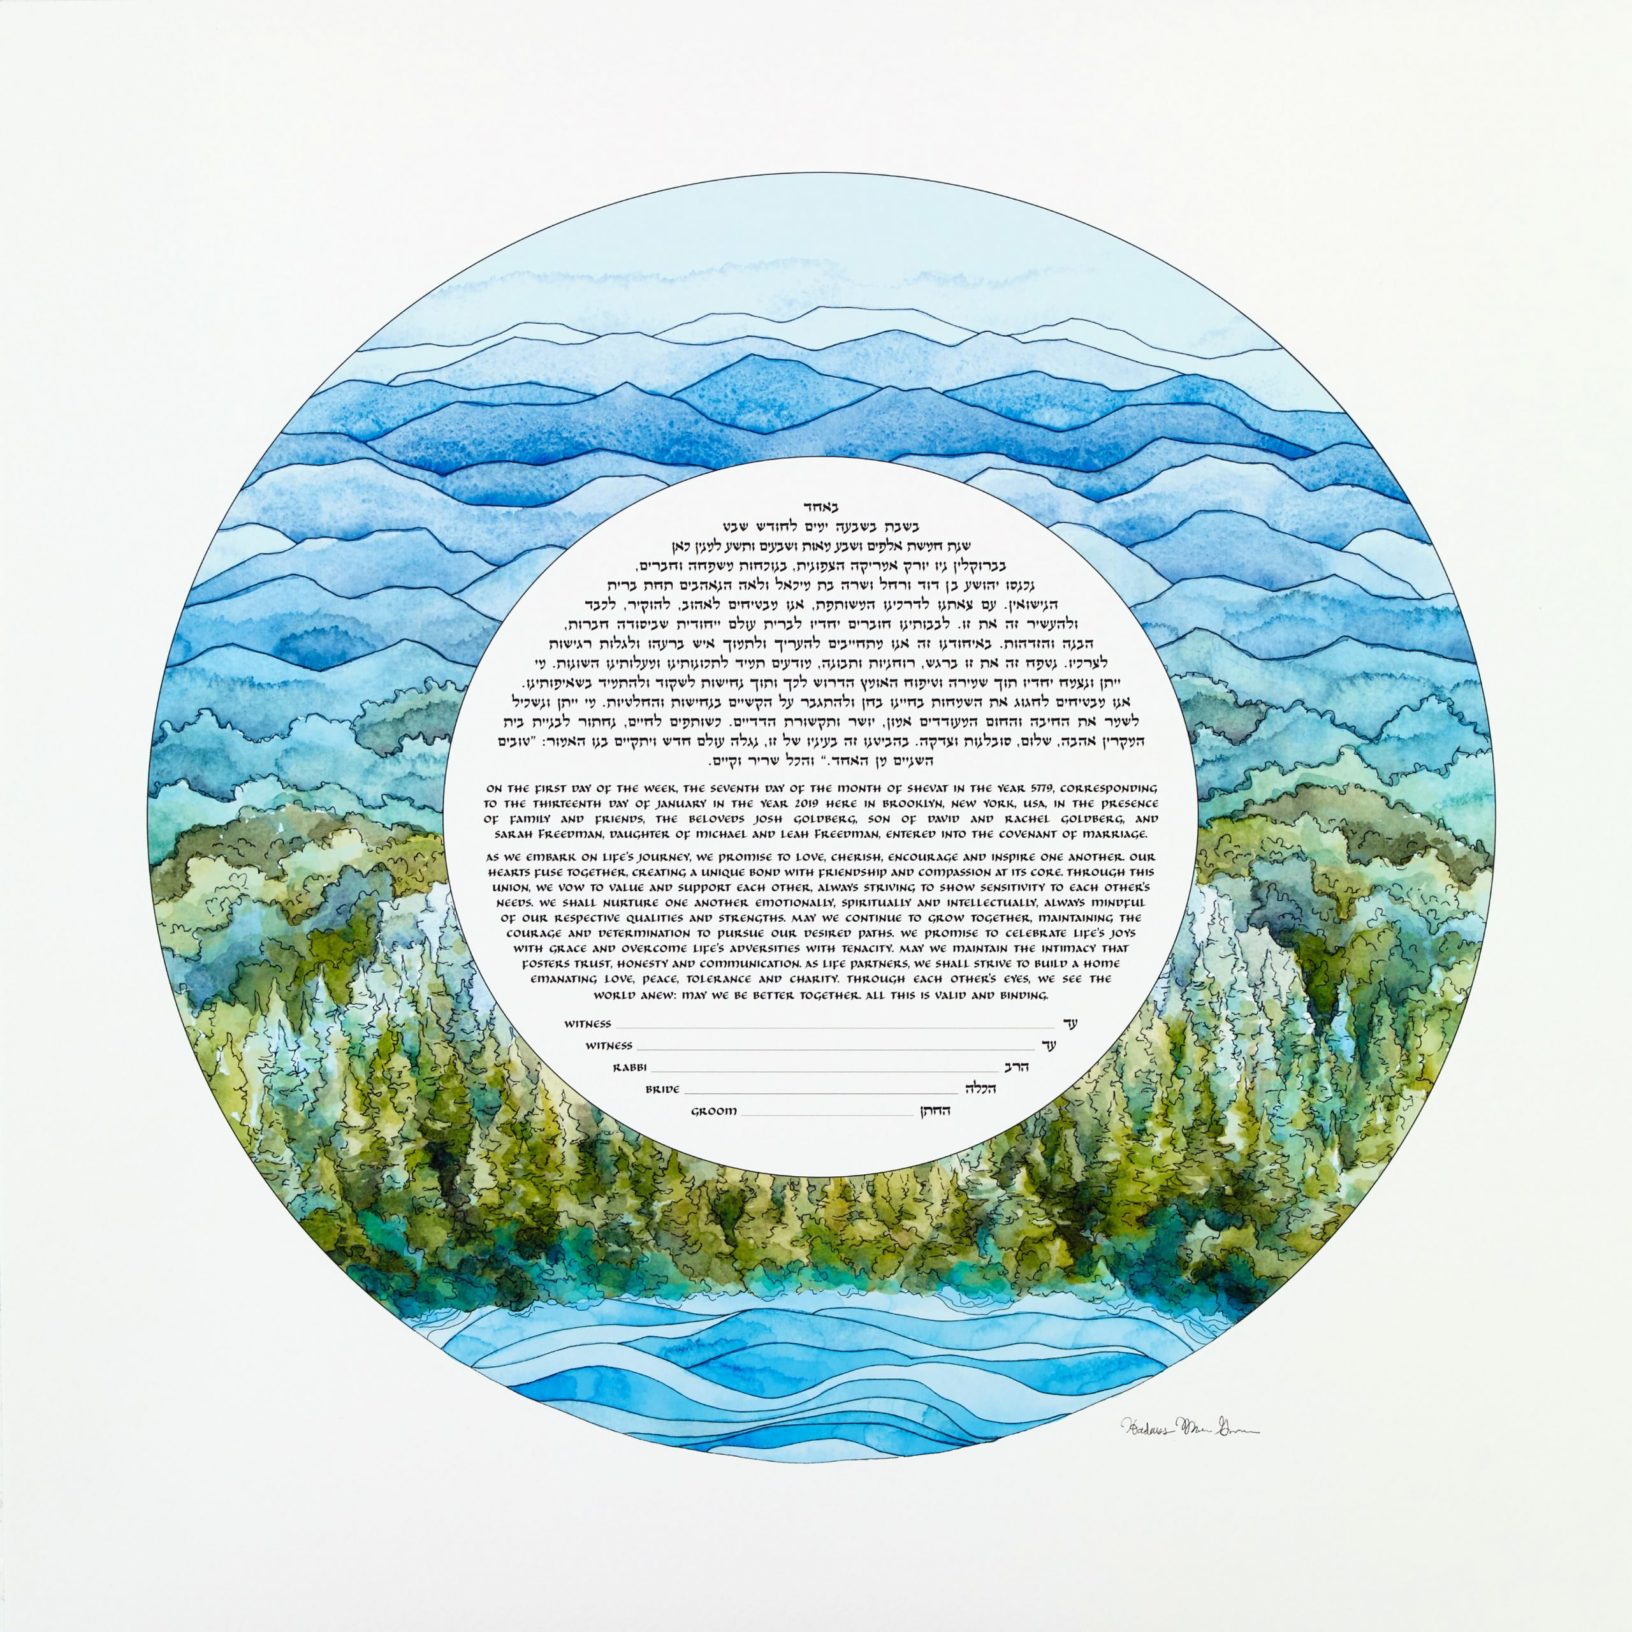 From The Mountains Blue Ketubah Store by Hadass Gerson